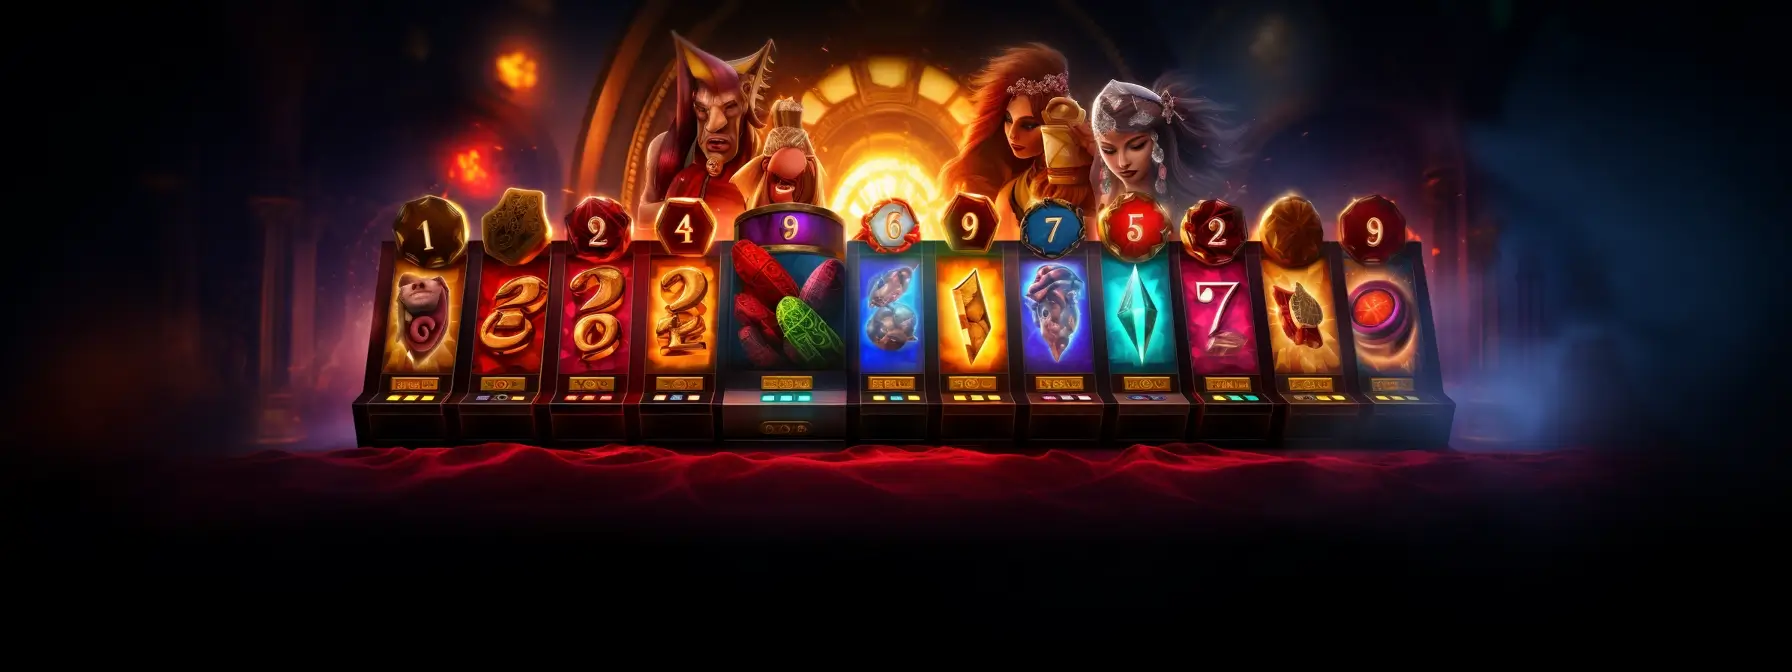 An image depicting the magic of online slots